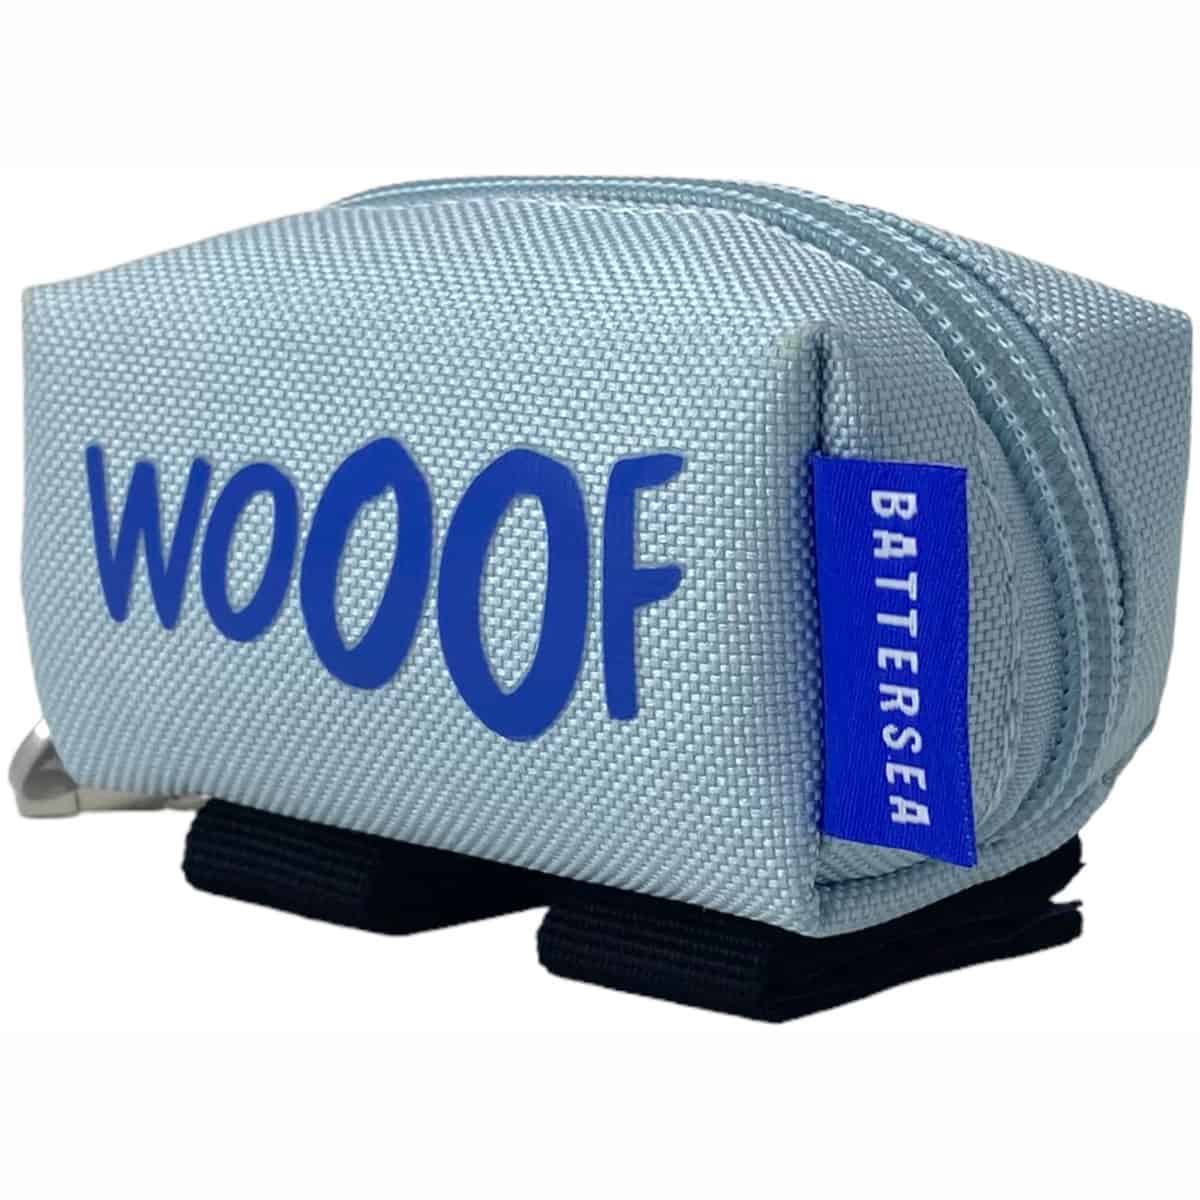 The Battersea Poop Bag Holder: Lightweight & portable, elevate your strolls with the convenience of the Battersea Poop Bag Holder - branding